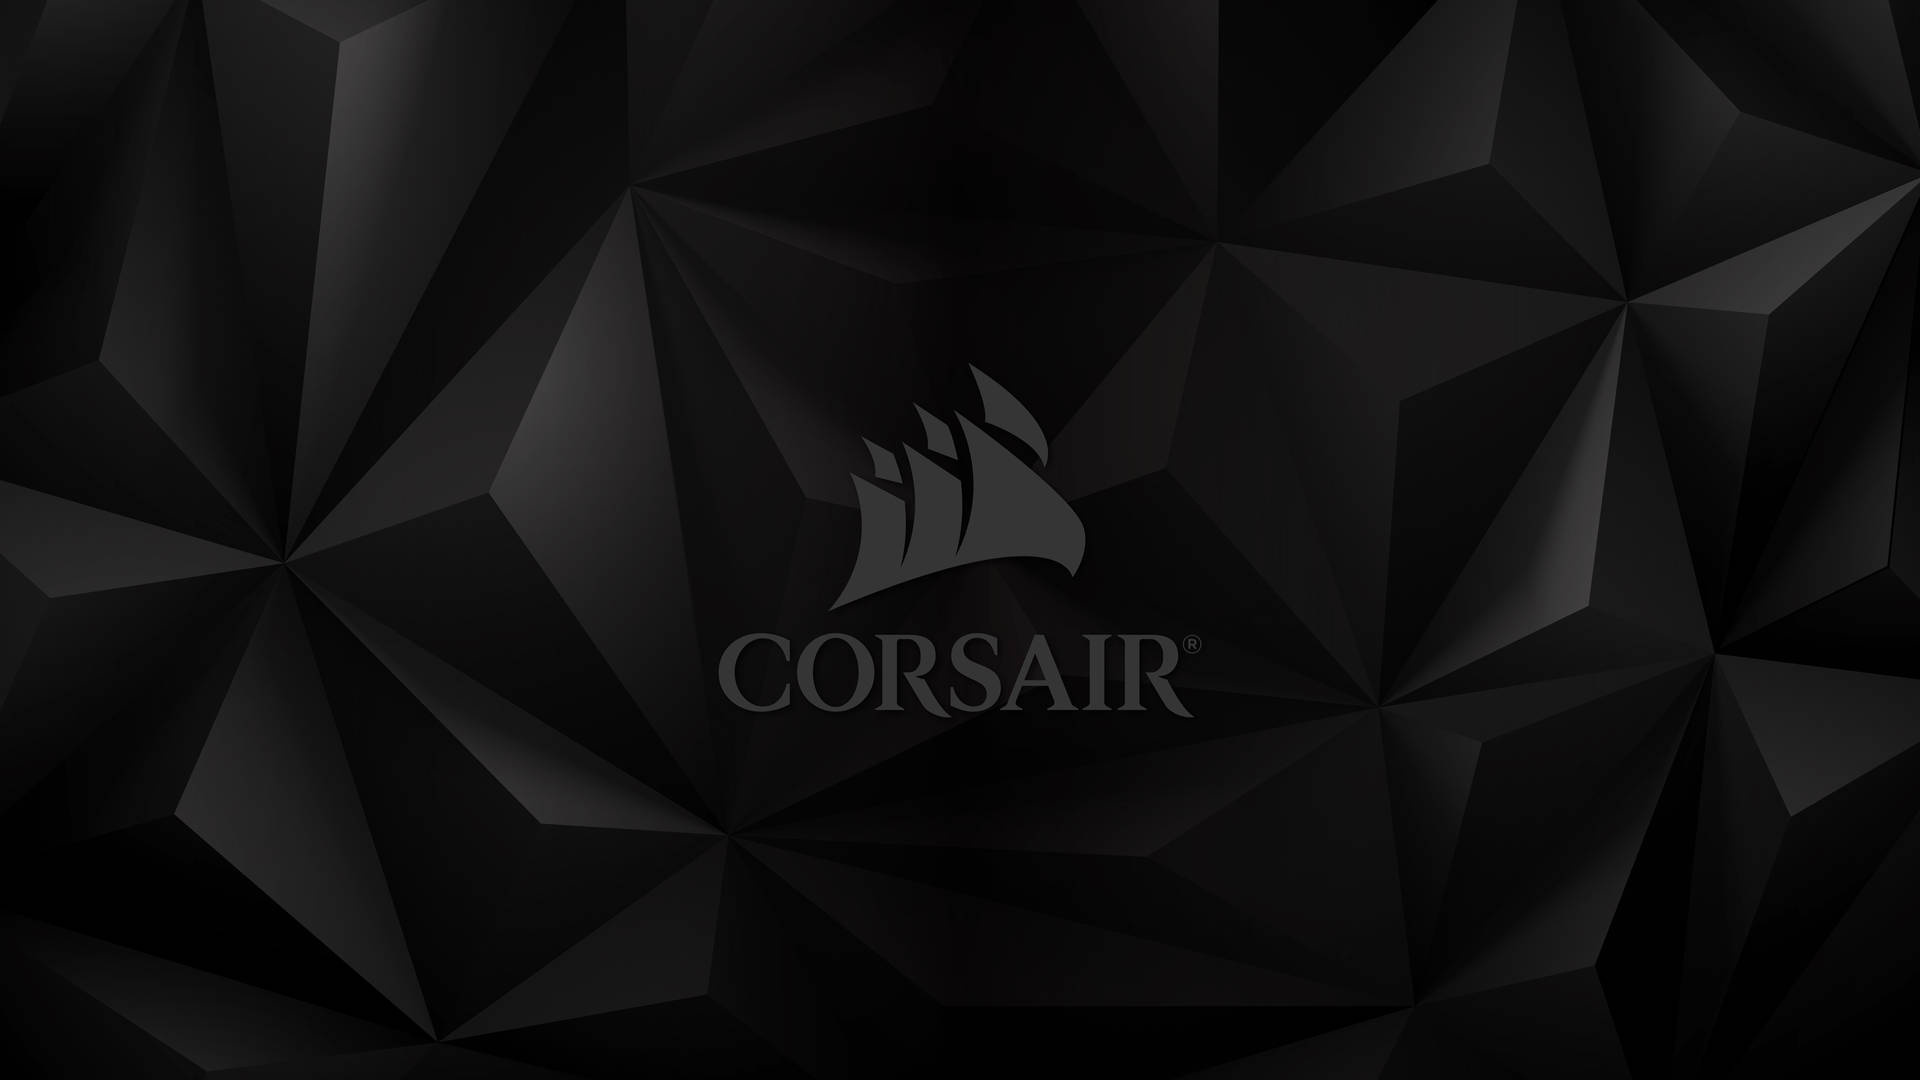 Show your edgy personality with Corsair's black geometric pattern! Wallpaper